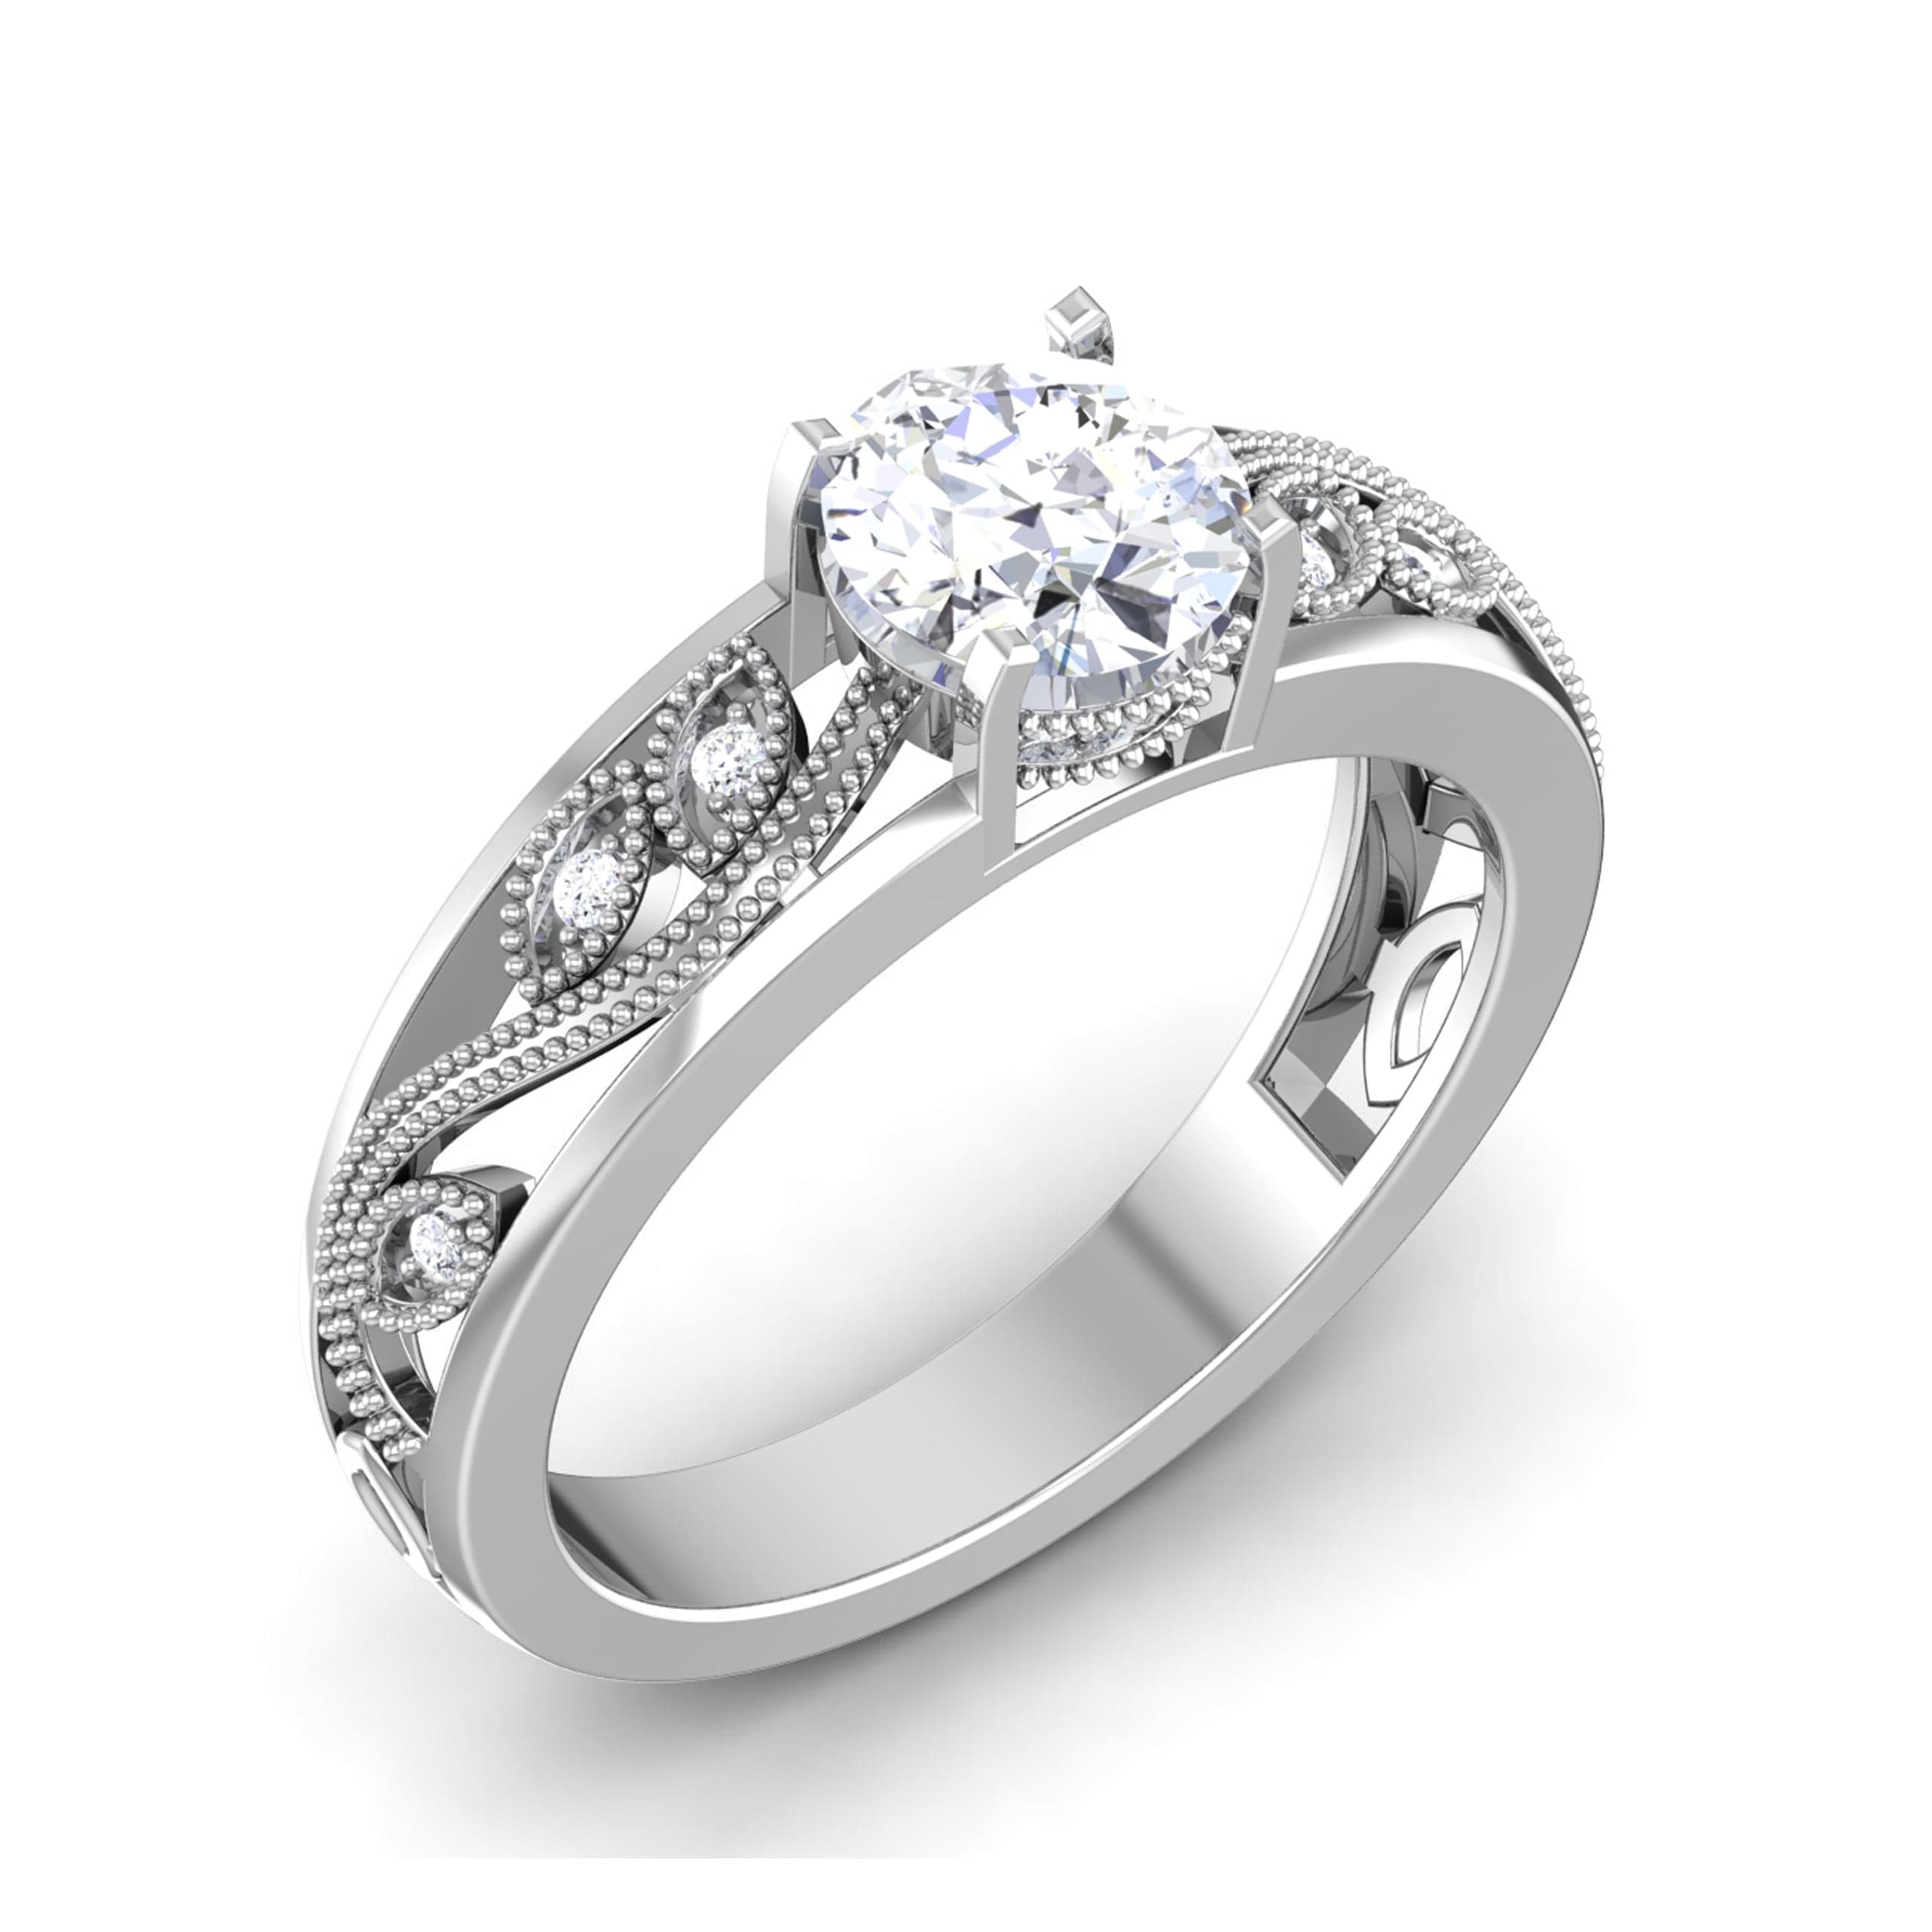 Diamond Engagement Rings NYC | Engagement Rings | Best Place to Buy Wedding  Rings in NYC